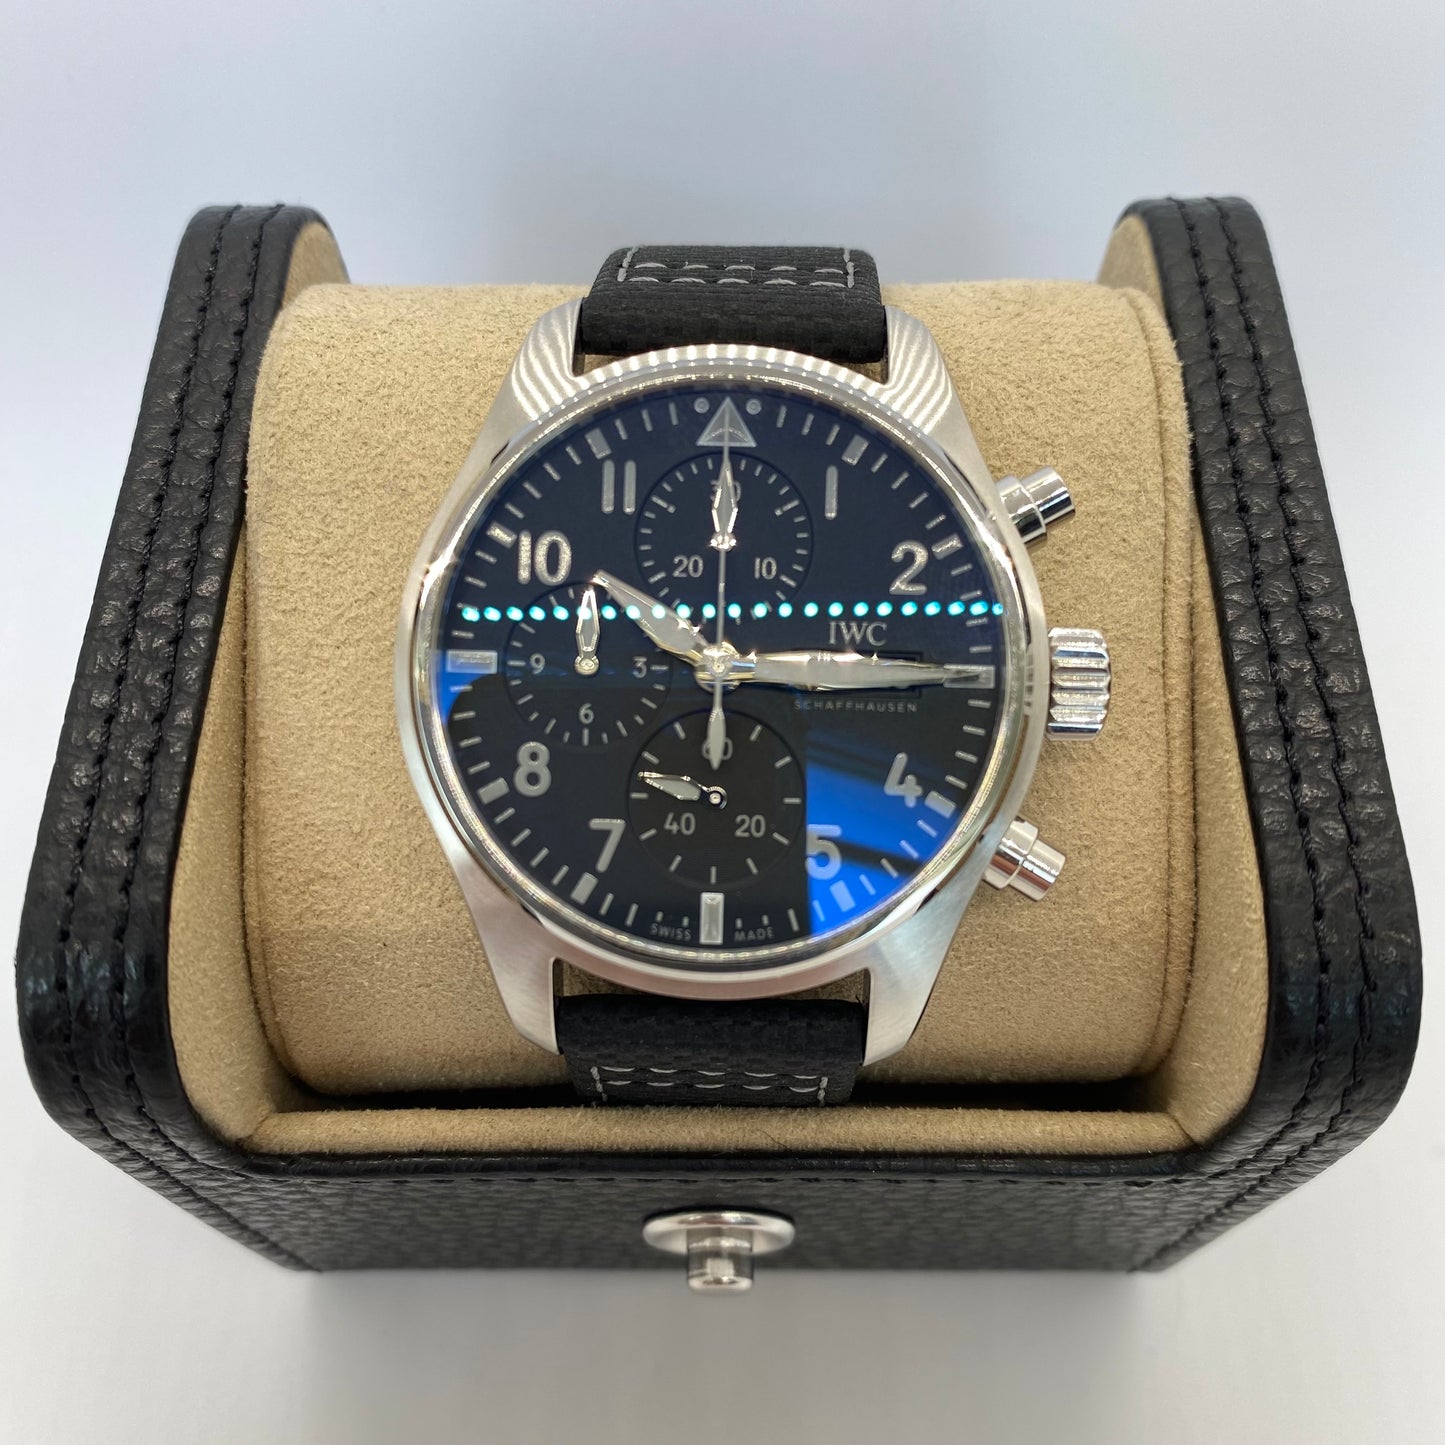 IWC Pilot’s Chronograph C.03 (Pre-owned) - 81/125